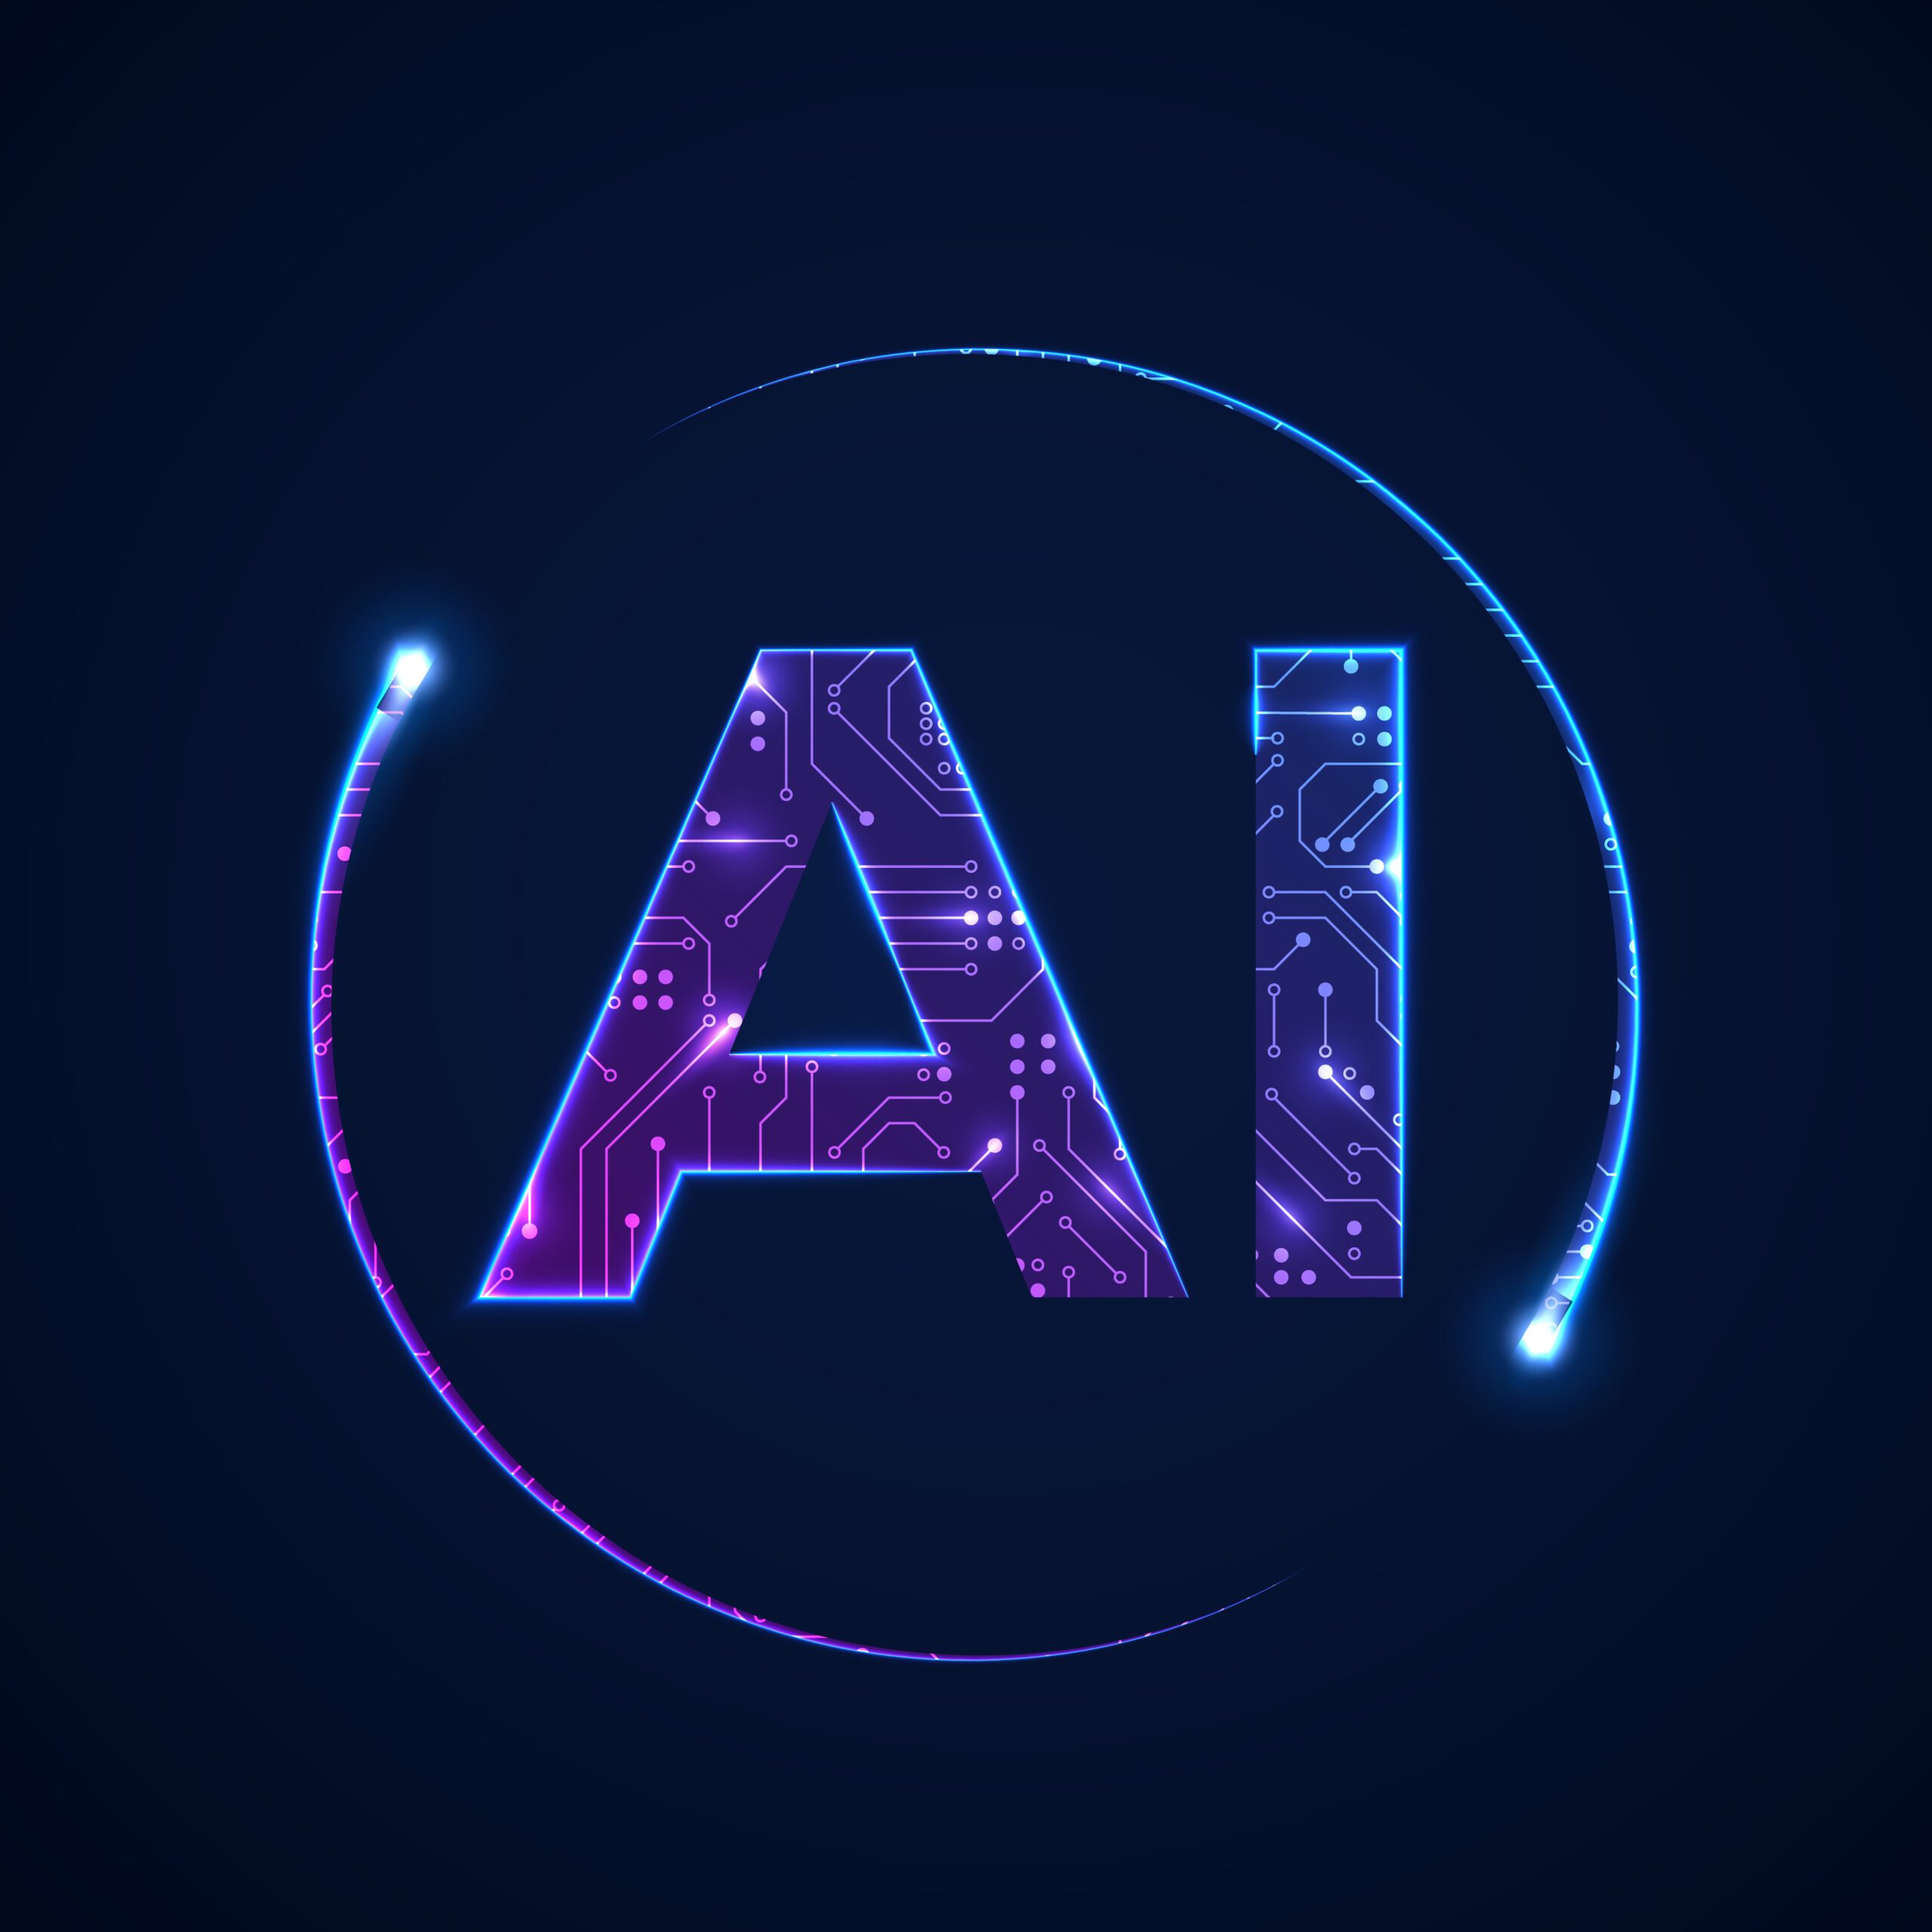 Image with the words AI for Artificial Intelligence